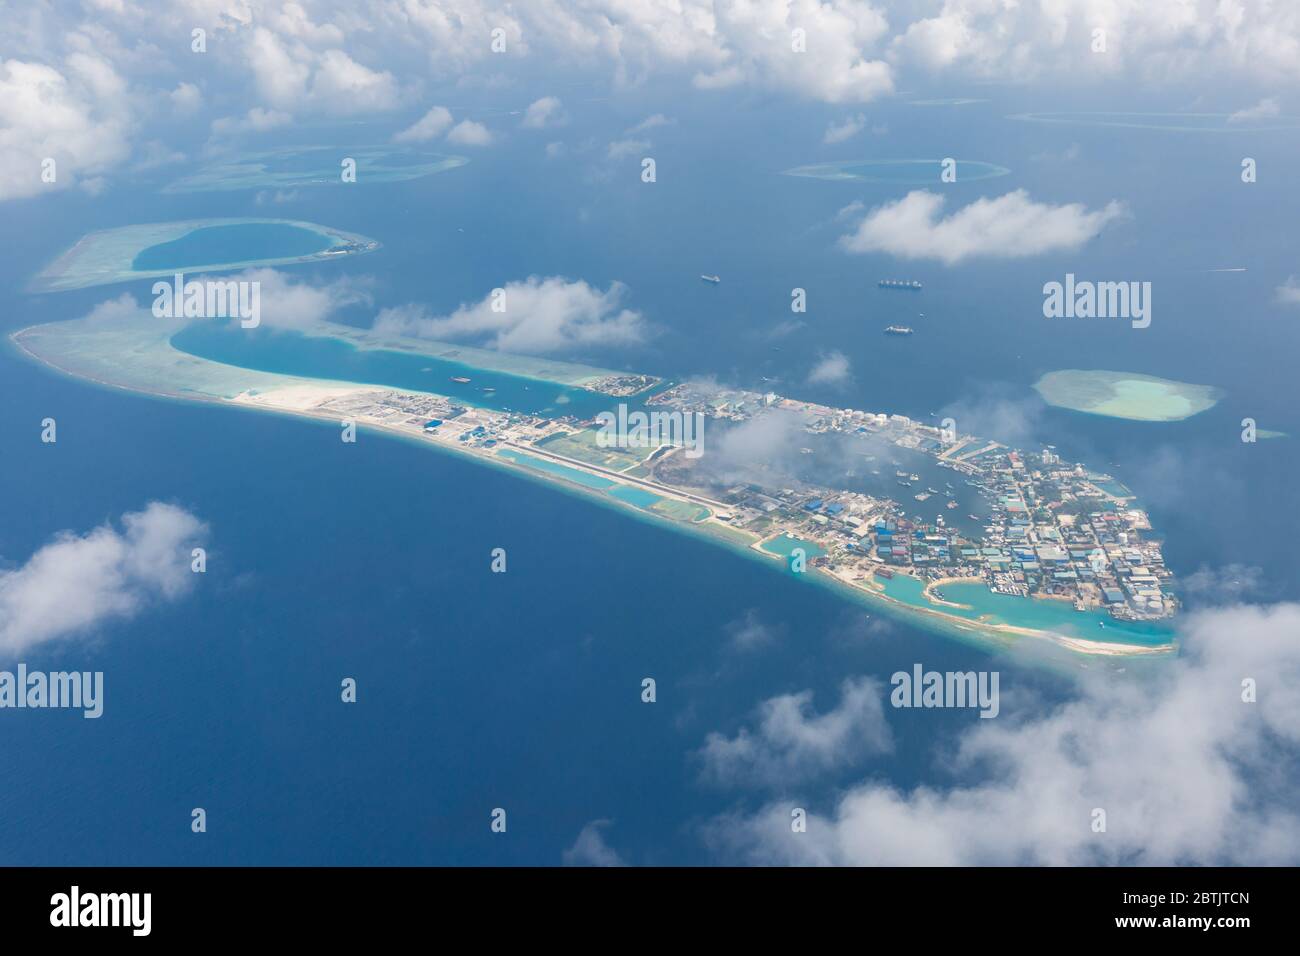 Maldives island capital island, Male. Hulhumale city island view from over the clouds. Aerial landscape in exotic travel destination Stock Photo